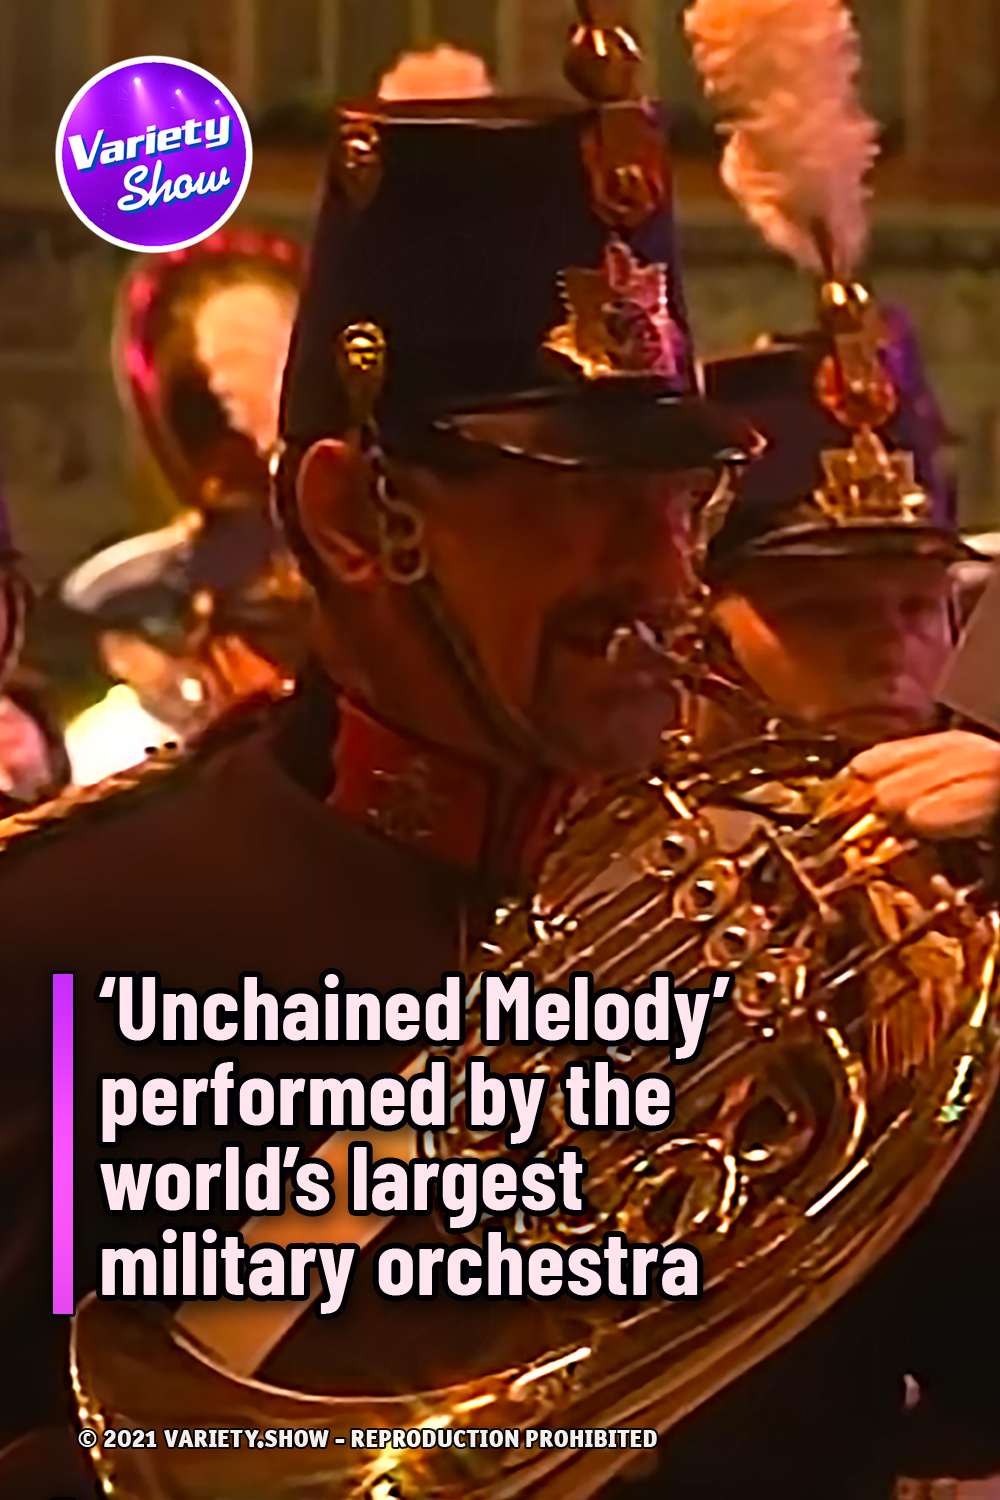 ‘Unchained Melody’ performed by the world’s largest military orchestra